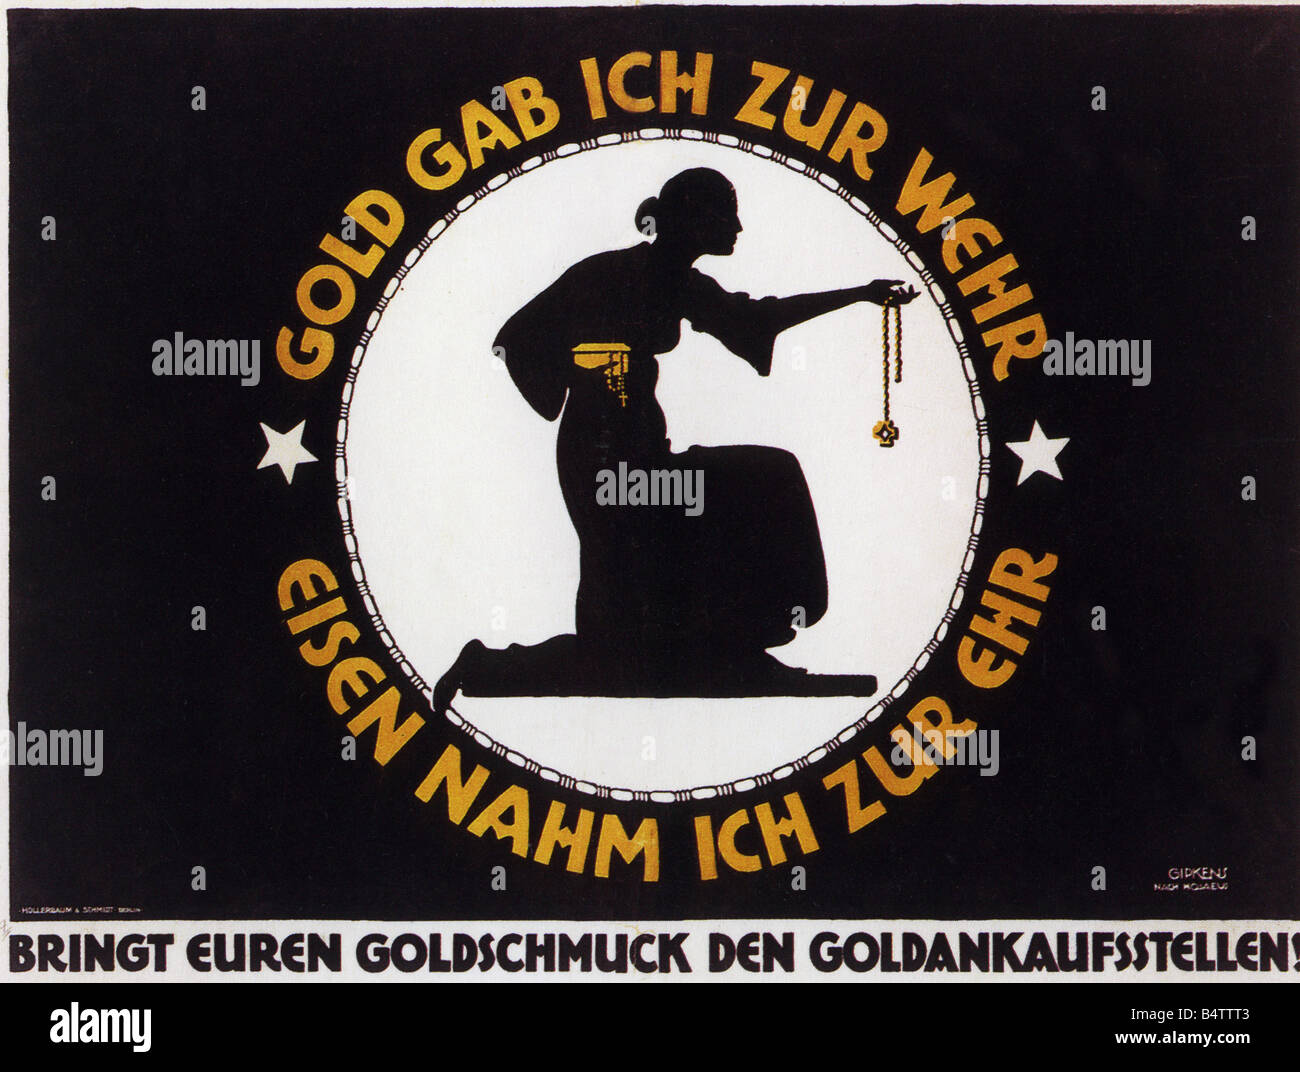 events, First World War / WWI, propaganda, poster 'Gold gab ich zur Wehr - Eisen nahm ich zur Ehr' (I gave gold for the war - I took iron for my glory), call to sell gold jewellery to the state, by Julius Gipkens, Germany, 20th century, Stock Photo